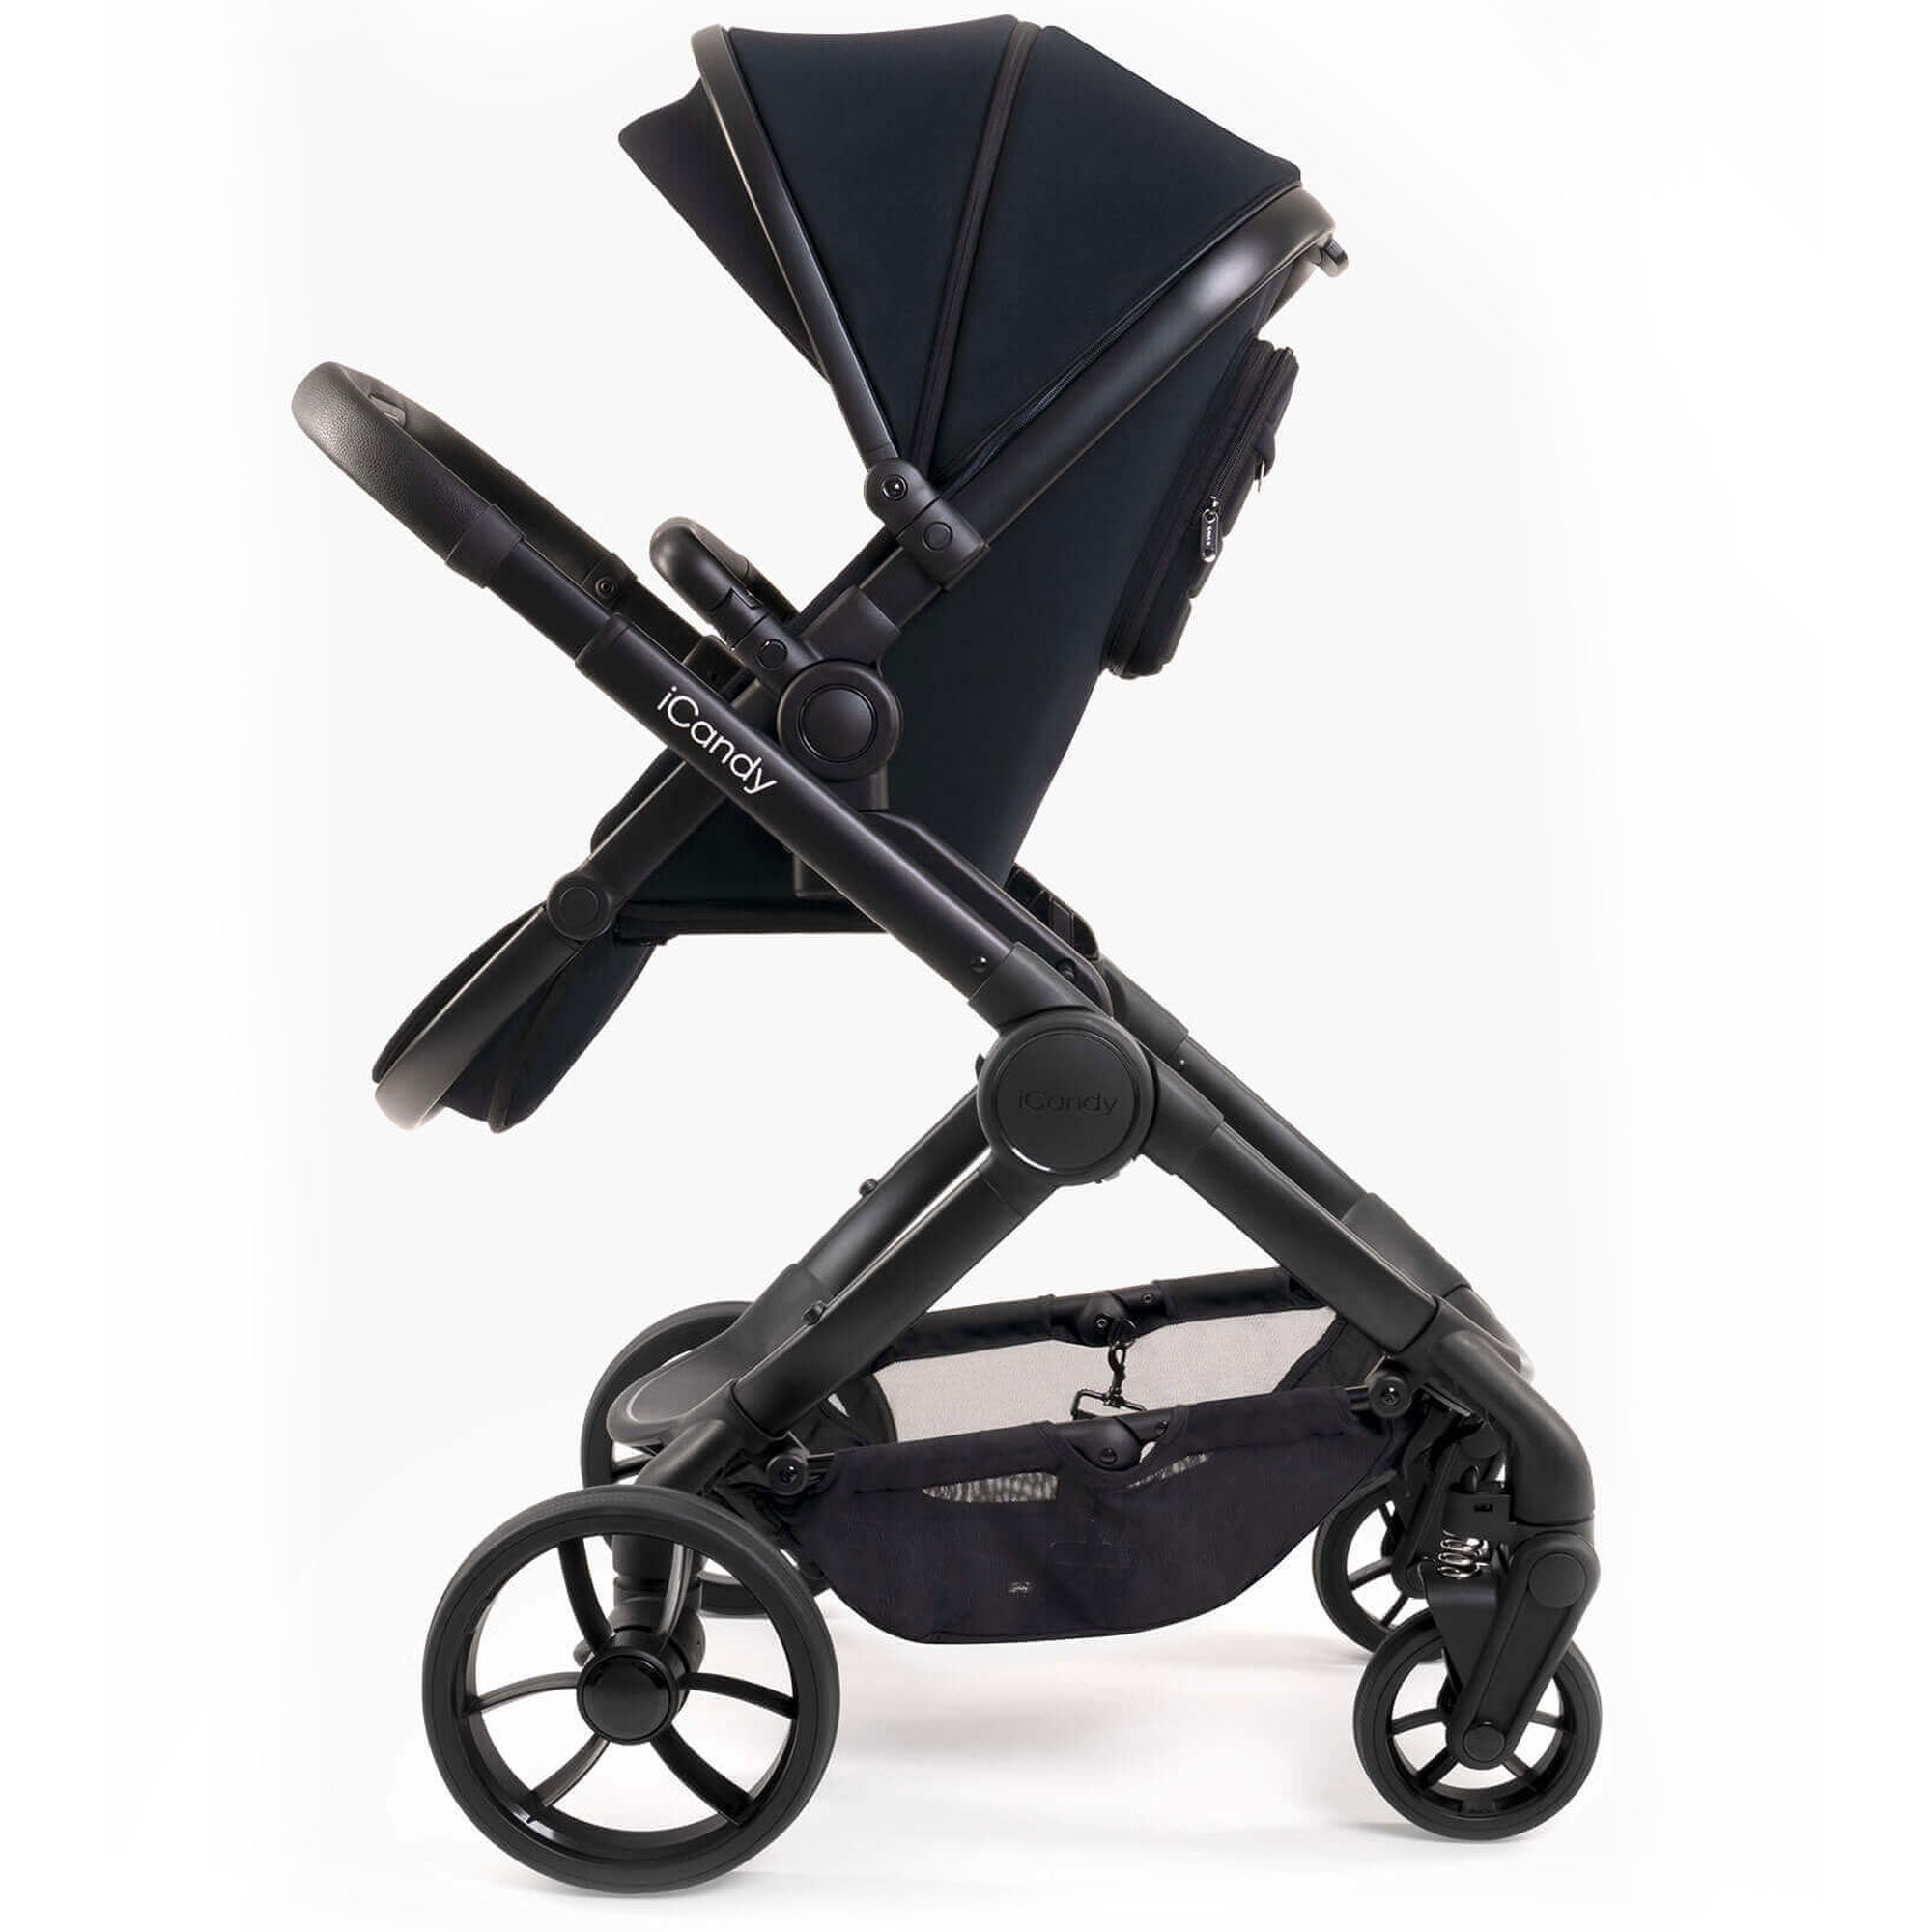 iCandy Peach 7 Complete Cybex Bundle in Black